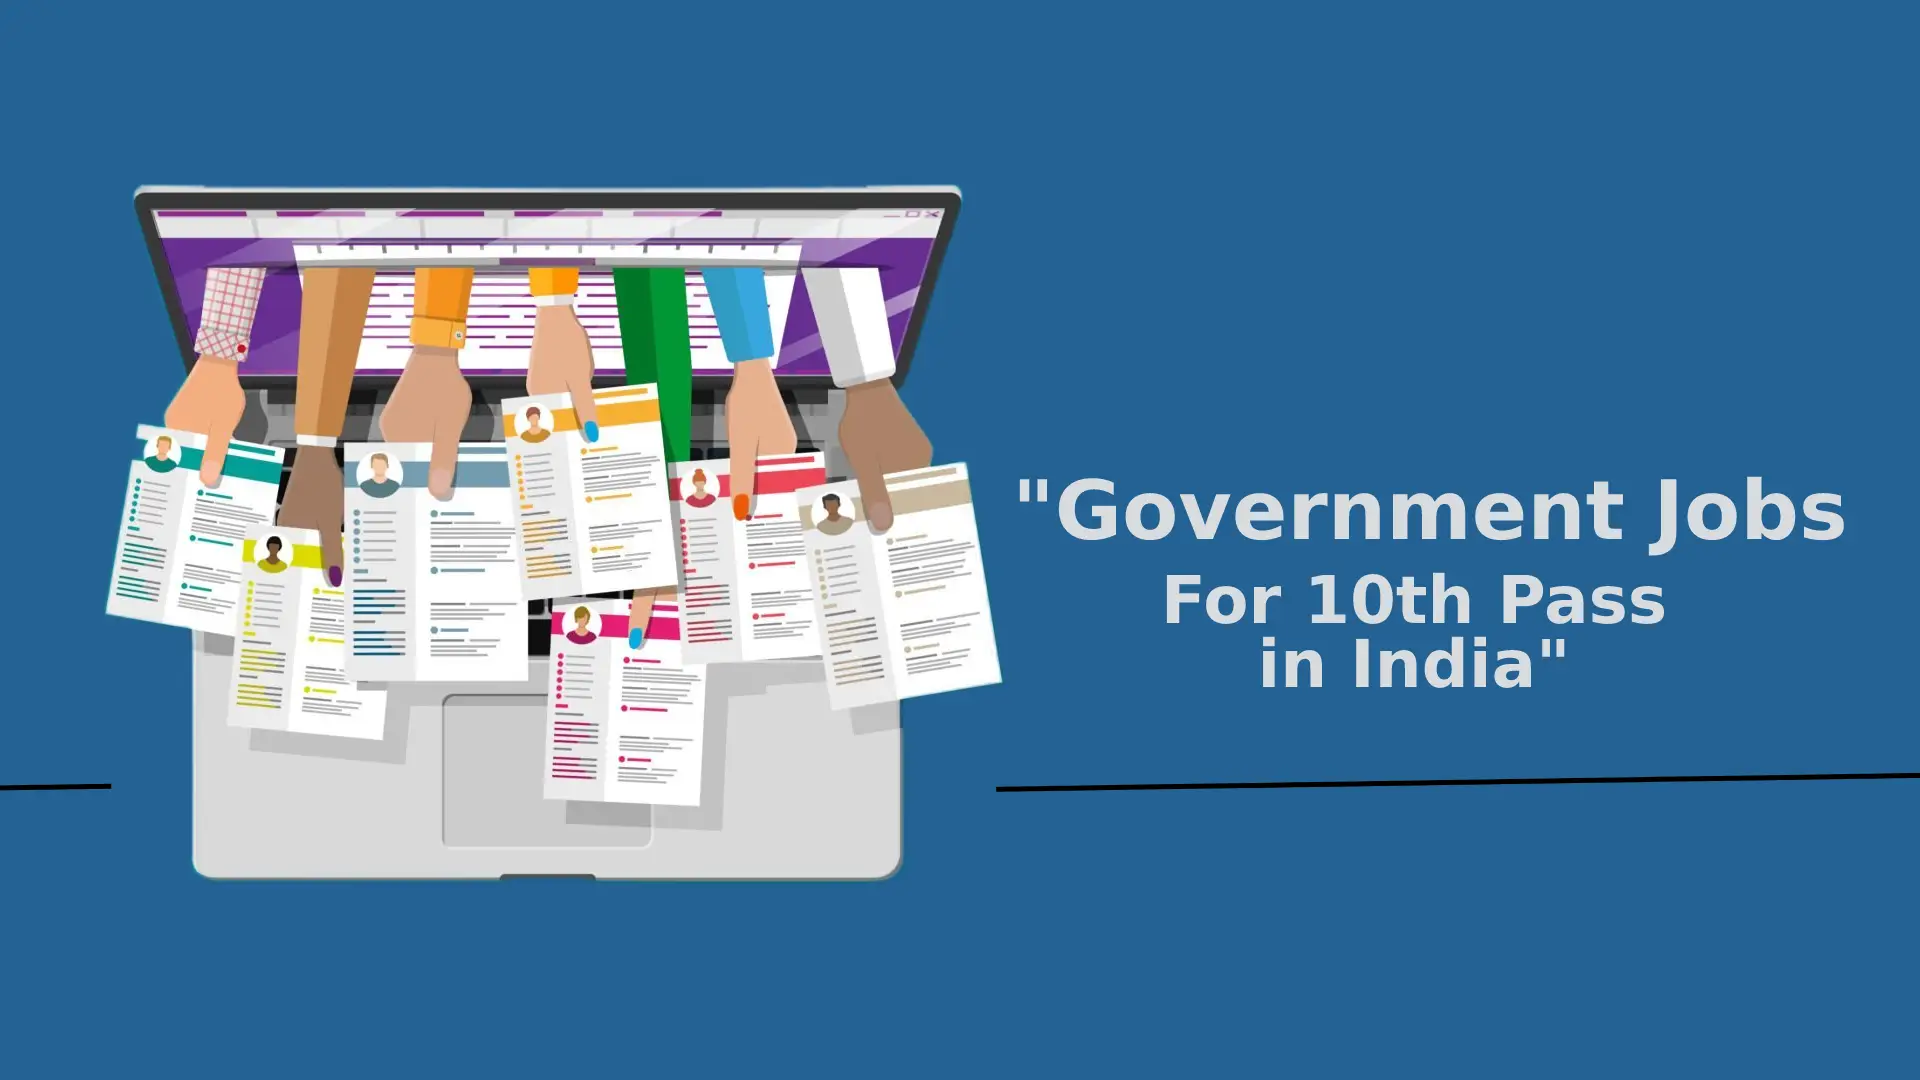 Government Jobs For 10th Pass In India